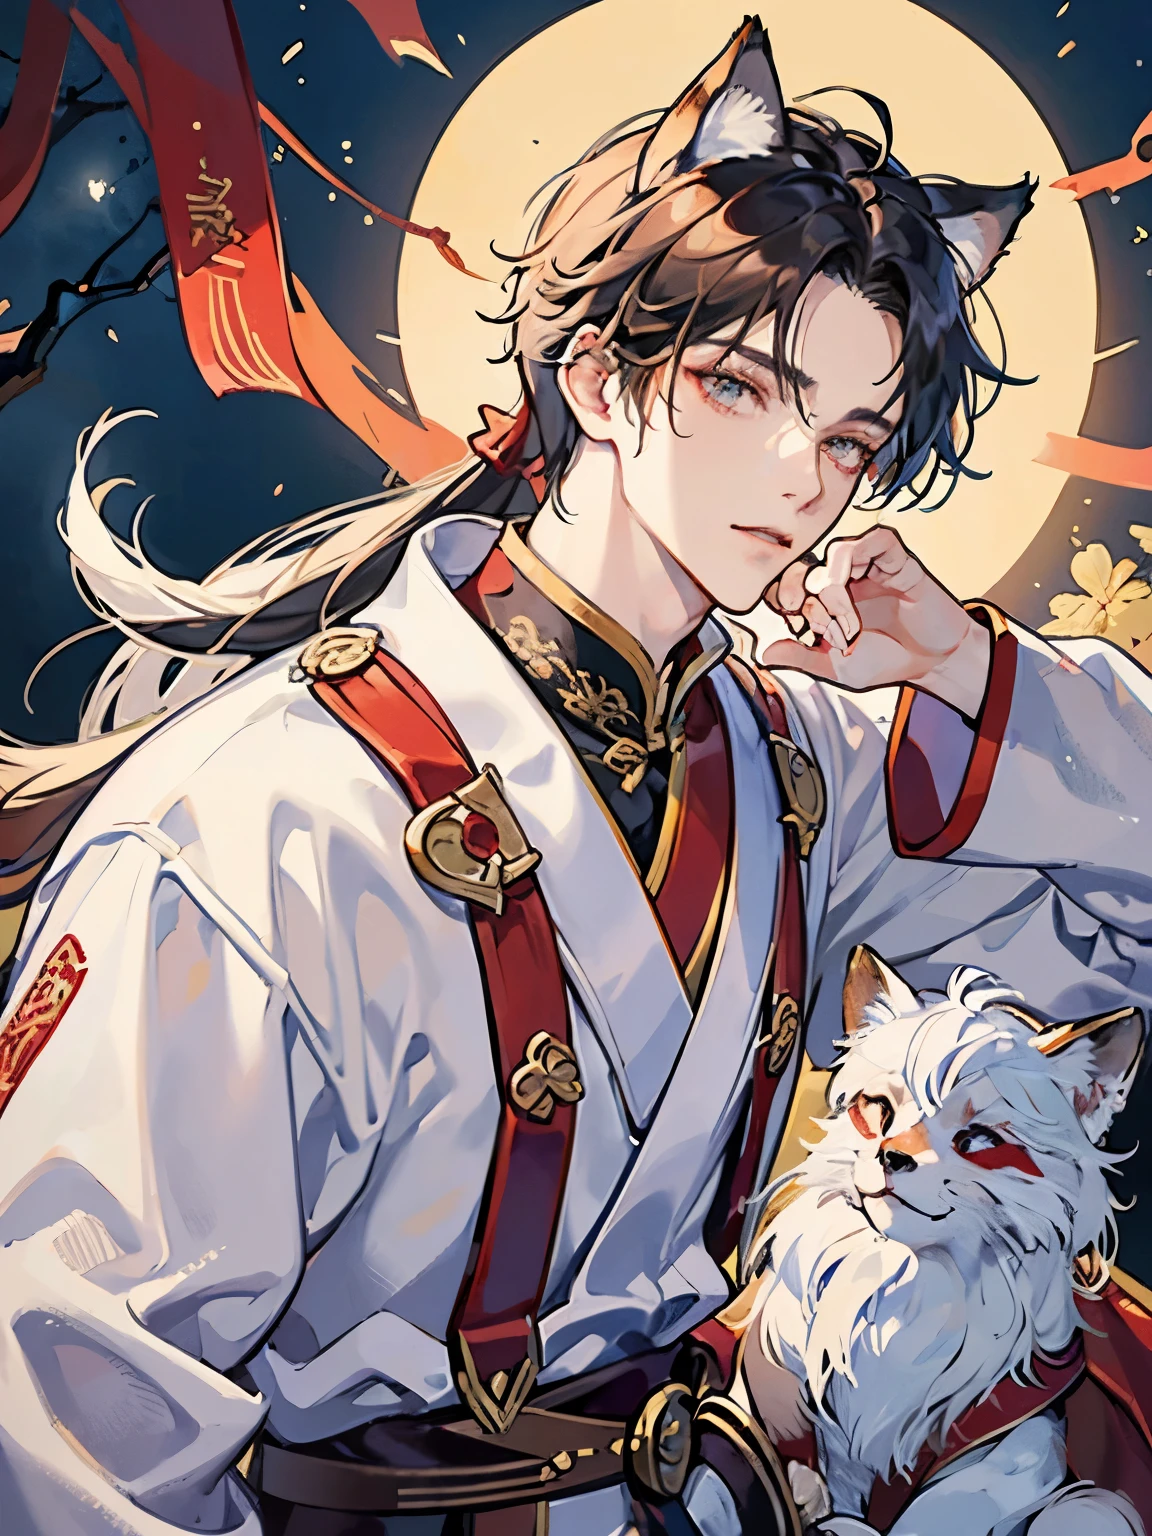 master piece，need，male，Chinese style，ChinaAncient，white hair，messy hair，white long hair，with long bangs，good looking，Male-like，kindness，big tall，quiet，red robes，outer，cloak，High hills，snow， youth，Ancient，masterpiece，need，Leprechaun，Red fox，animal ears，good looking guy，brunette hair，hair scattered，dark hanfu，Cool Handsome、